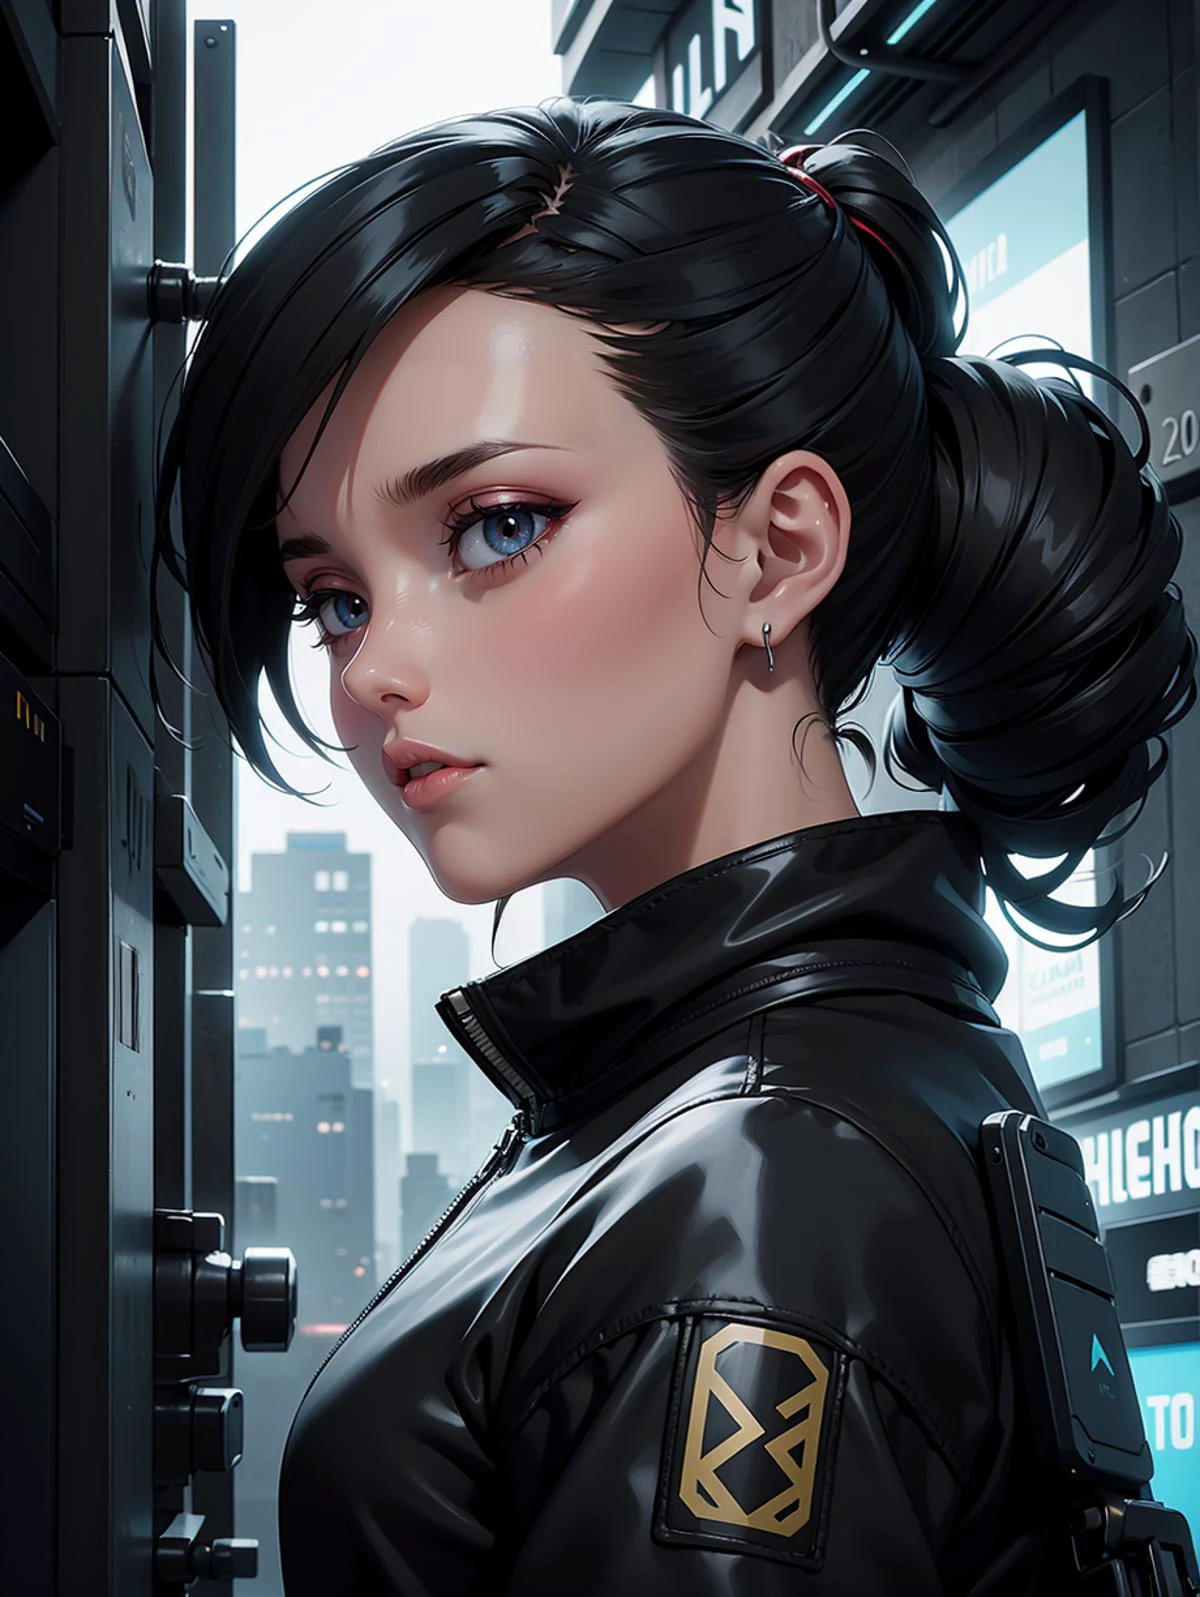 (close-up portrait:1.3) (extreme angle:1.2 ), Semi-realistic cyberpunk anime portrait depicting a young woman standing in a futuristic urban setting, Rain-soaked clothes, (Gritty atmosphere:1.3), Detailed cityscape, (HDR image:1.2), (Enhanced photography:1.3), (Dreamscape:1.2), BREAK, (Futuristic elements:1.3), (Dynamic composition:1.2), (Vivid colors:1.3), (Immersive environment:1.2), BREAK, Created with meticulous detail, High-resolution, Trending on DeviantArt